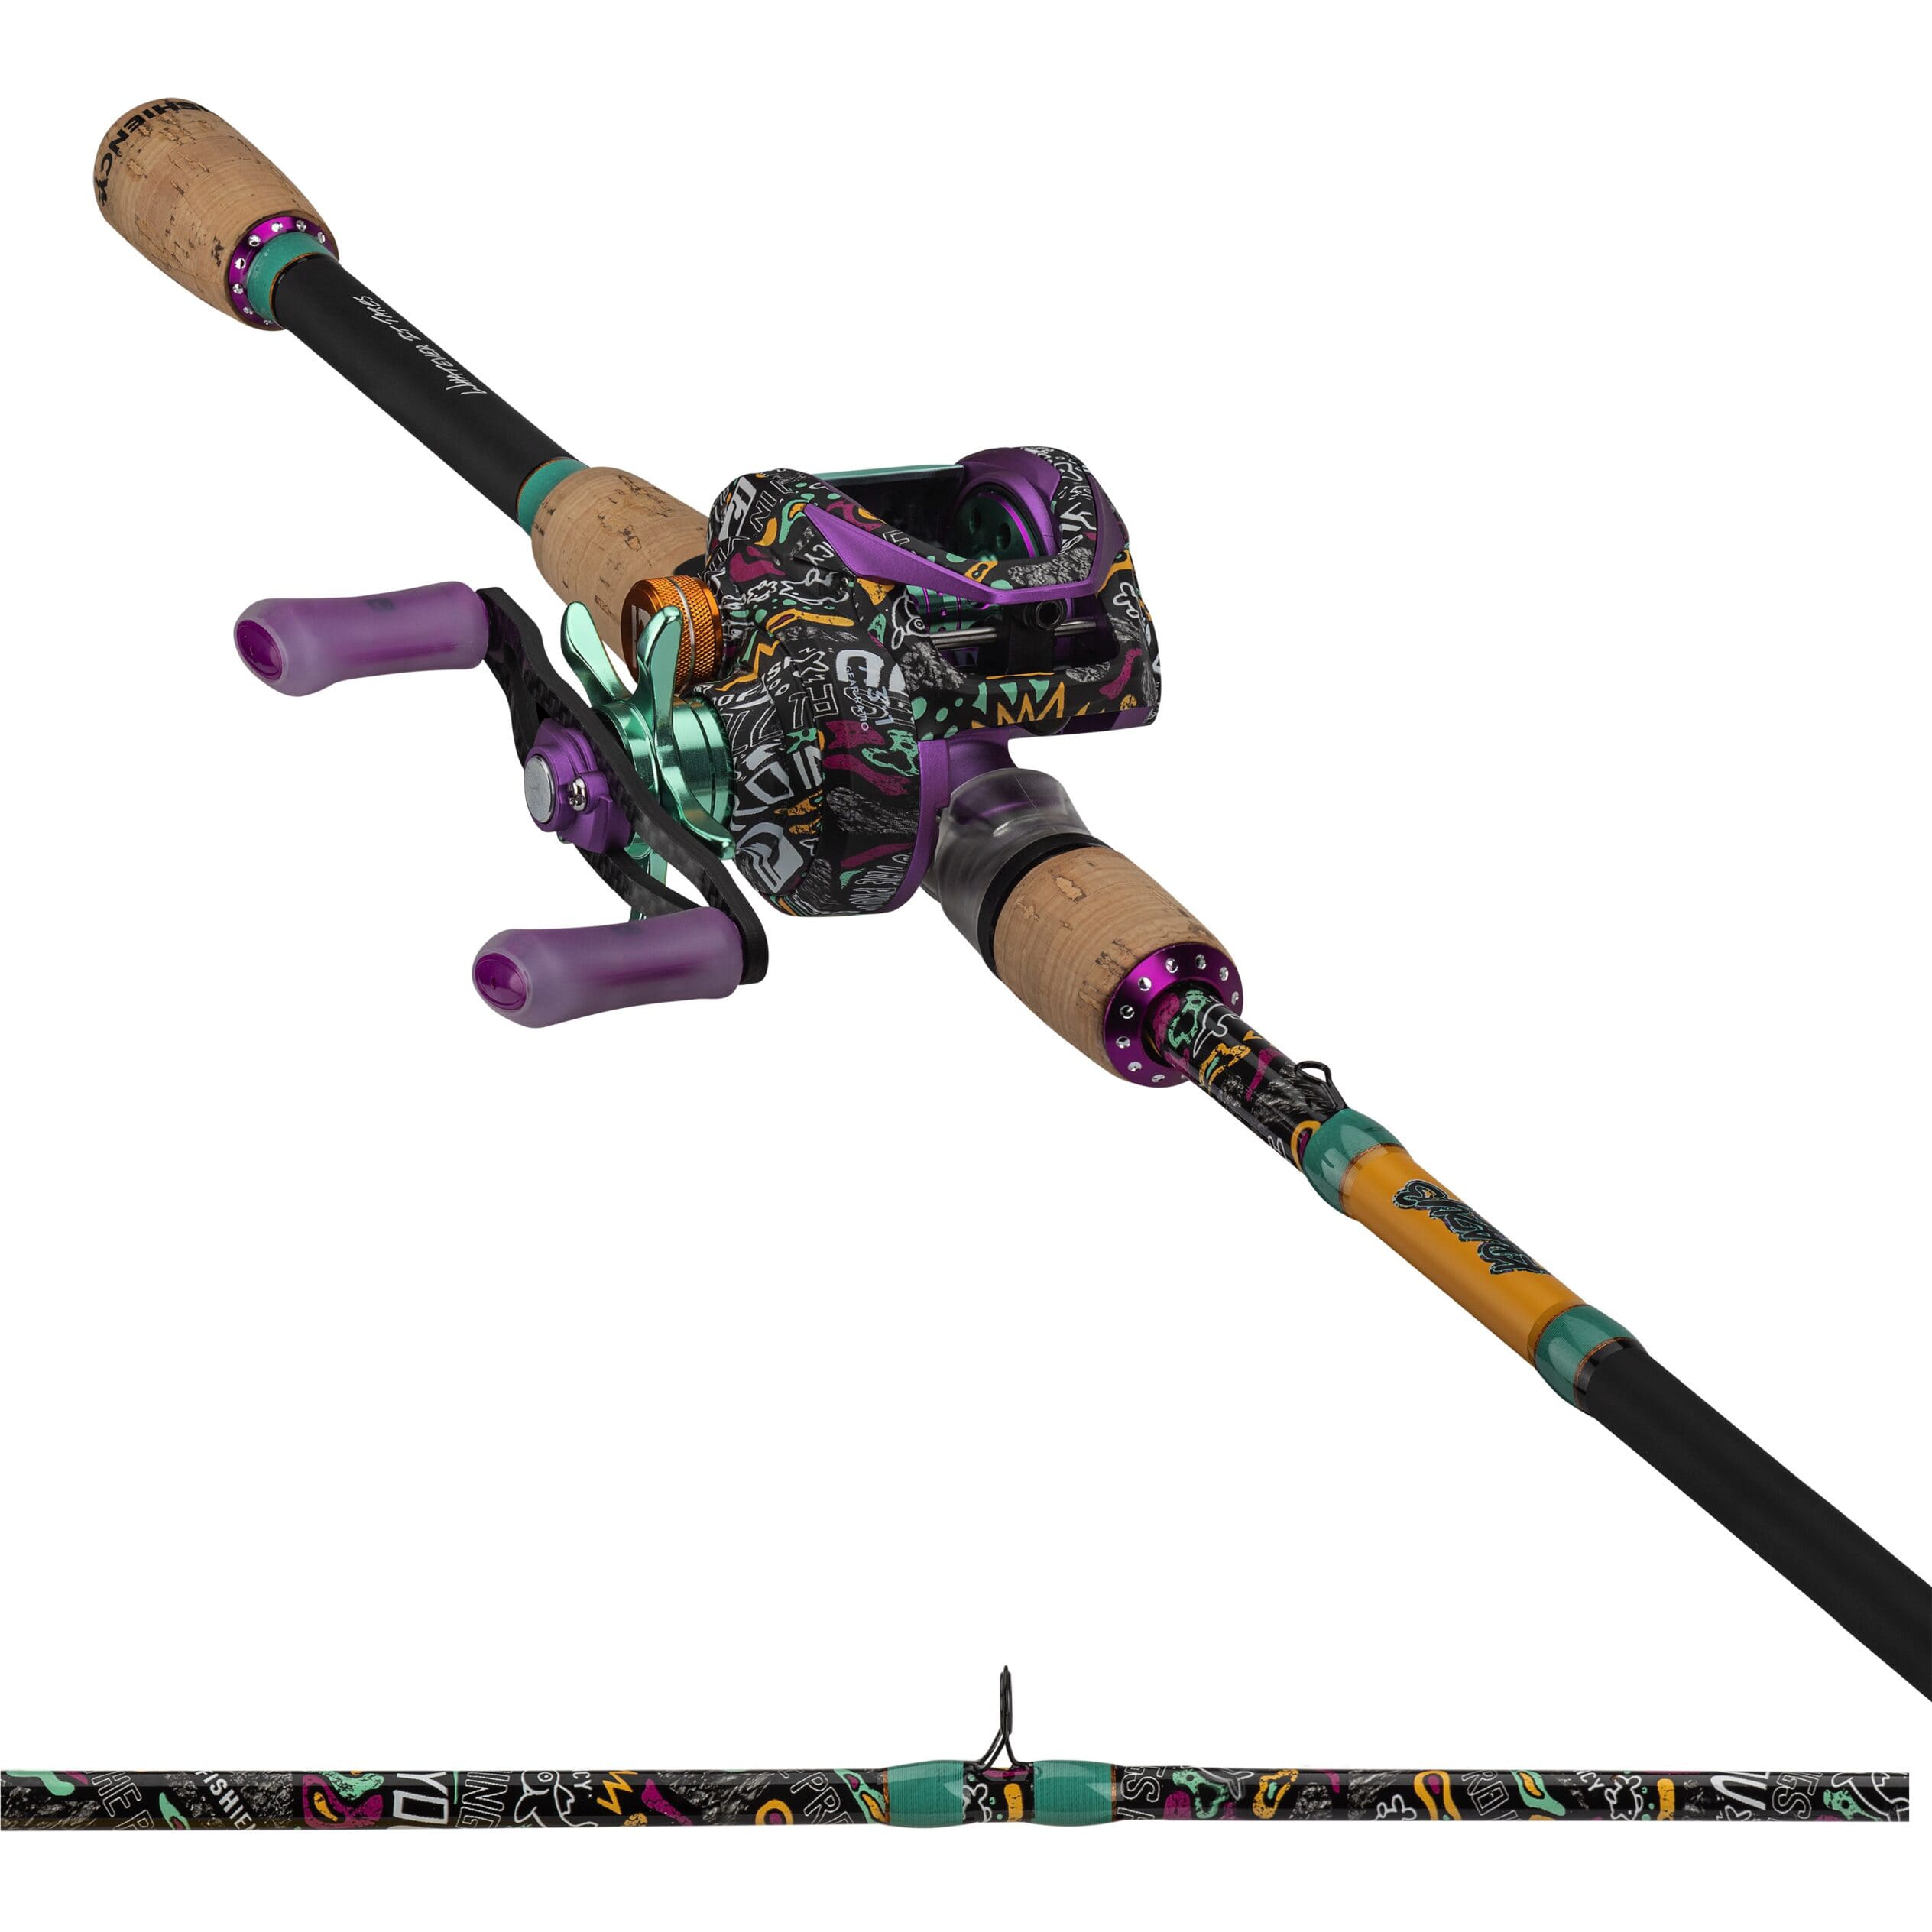 ProFISHiency 8ft Big Fish Krazy 2.0 Spinning Combo Multicolor BFC8KRZY2SPIN